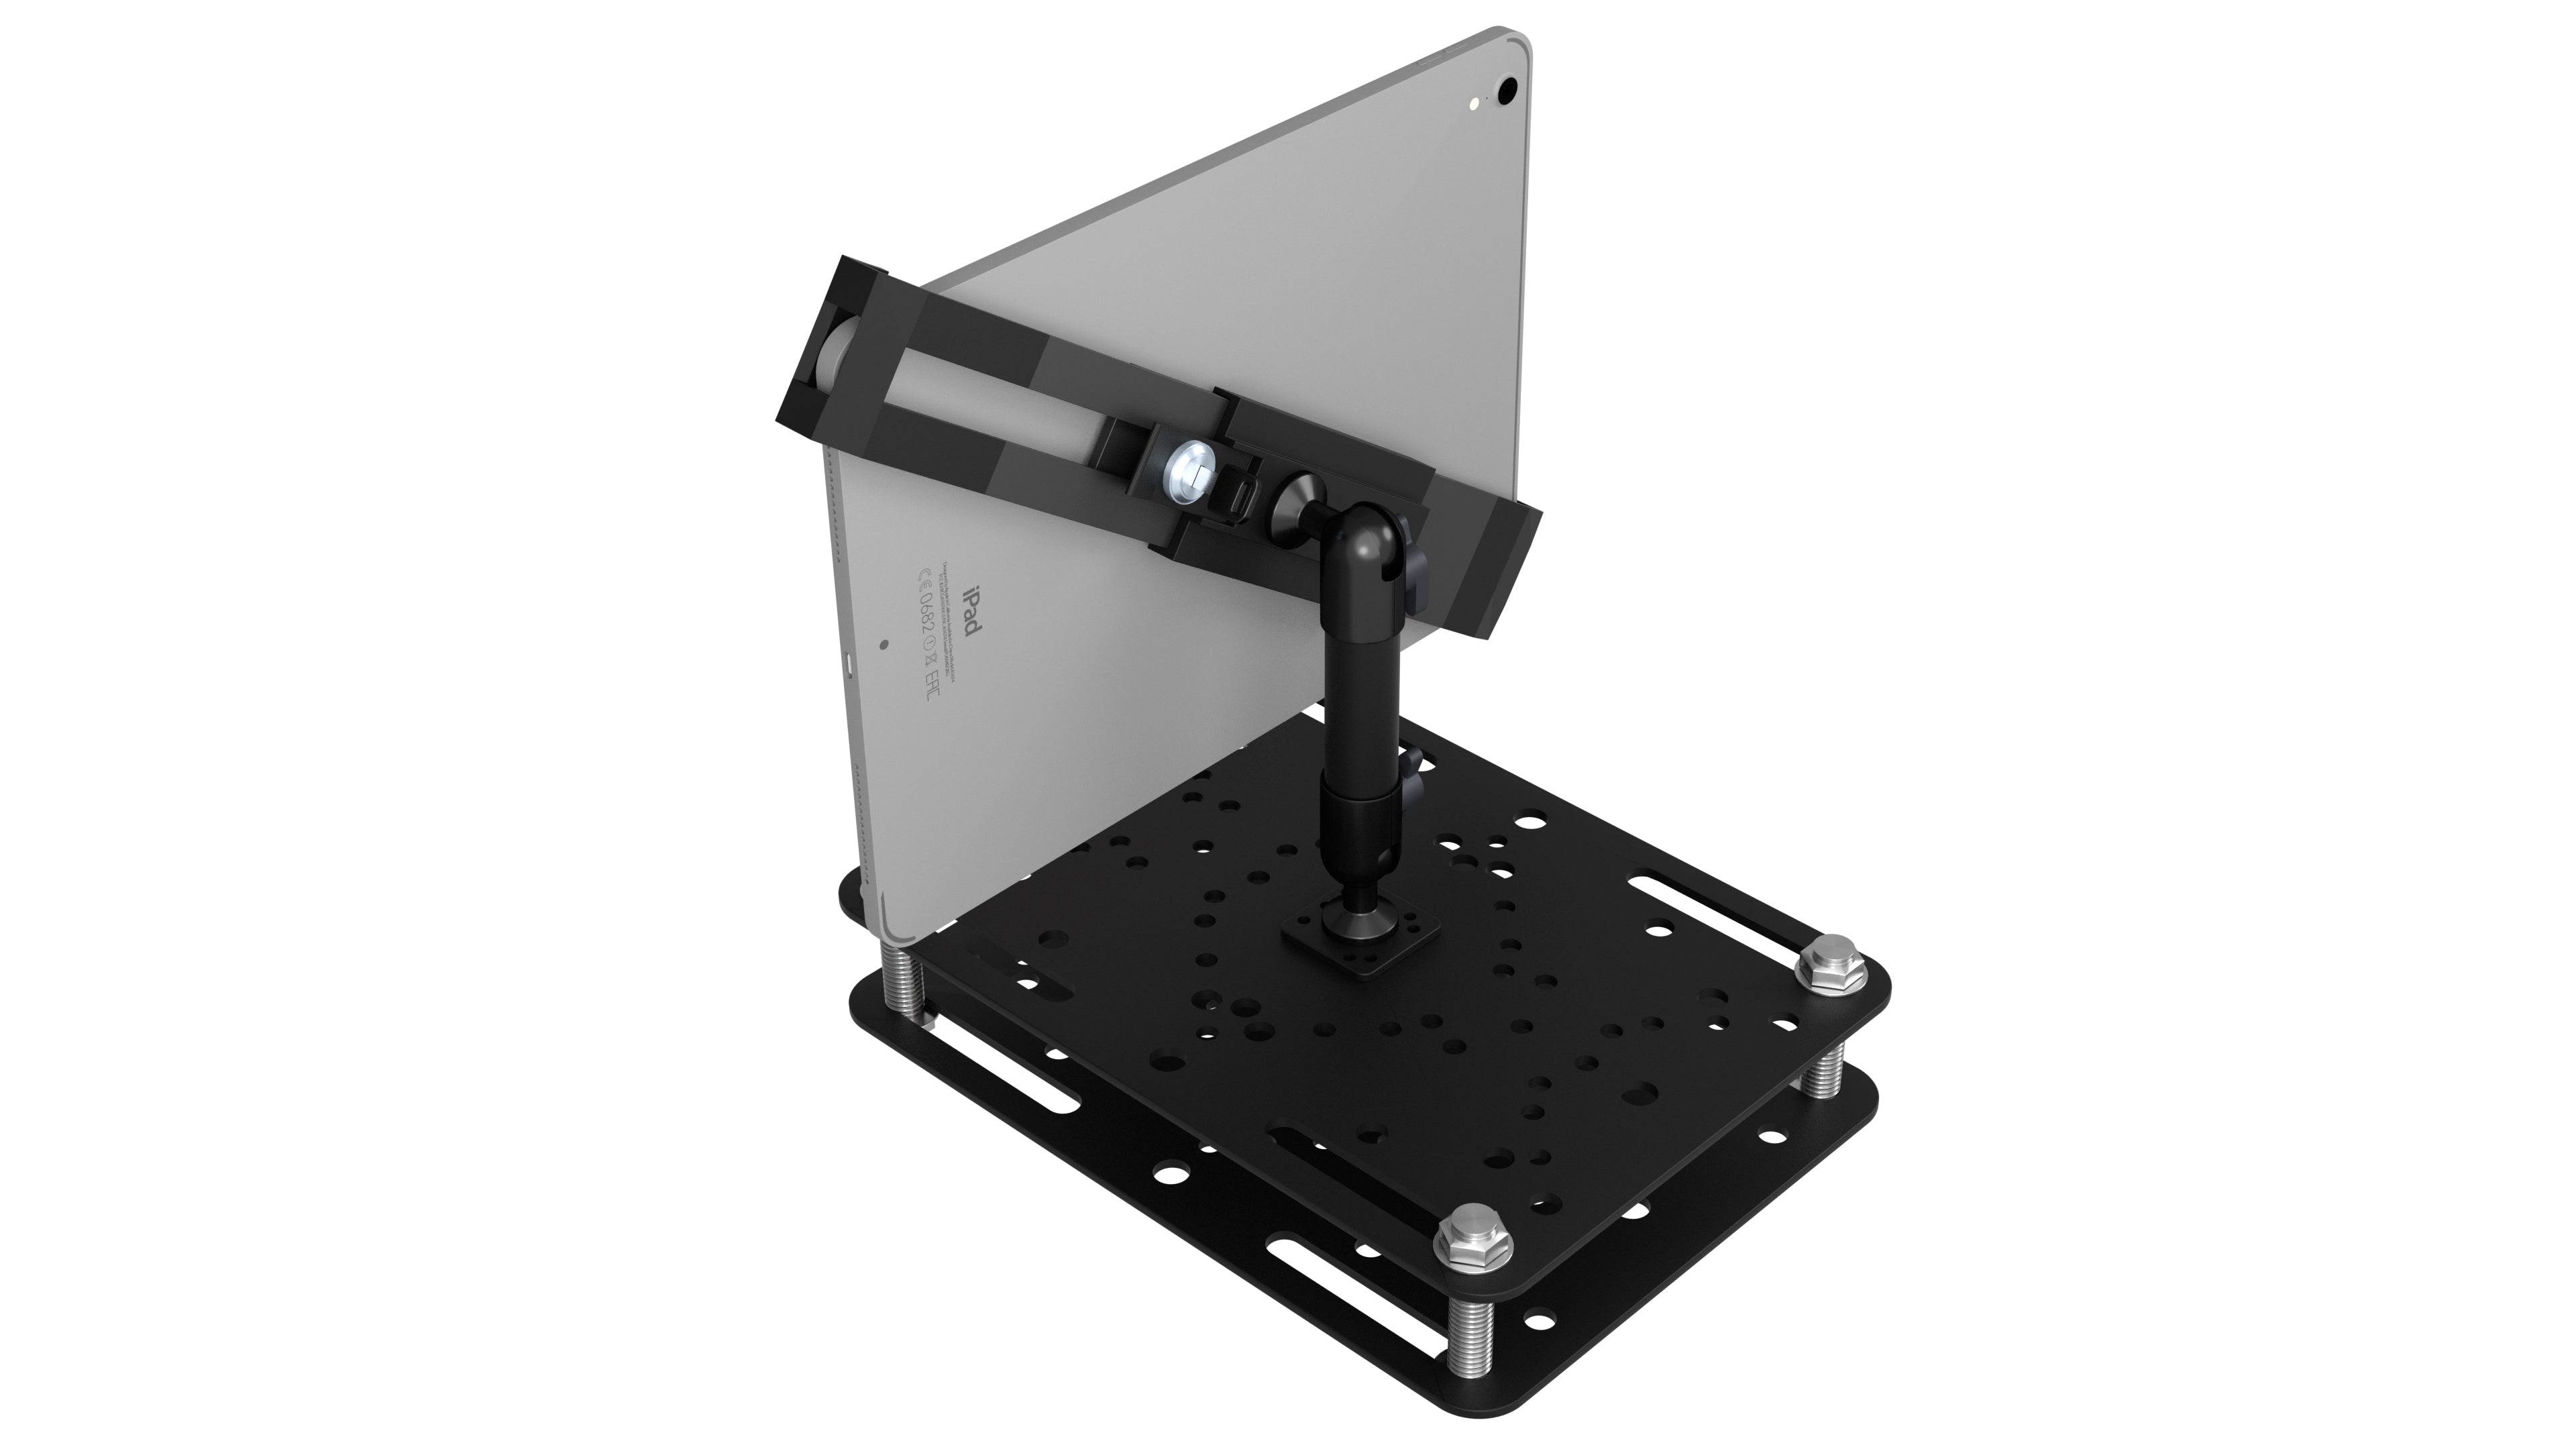 Tablet Security Forklift Mounting Kit w/ Universal Mounting Plates & Adjustable Holder for 7 - 14 inch Tablets